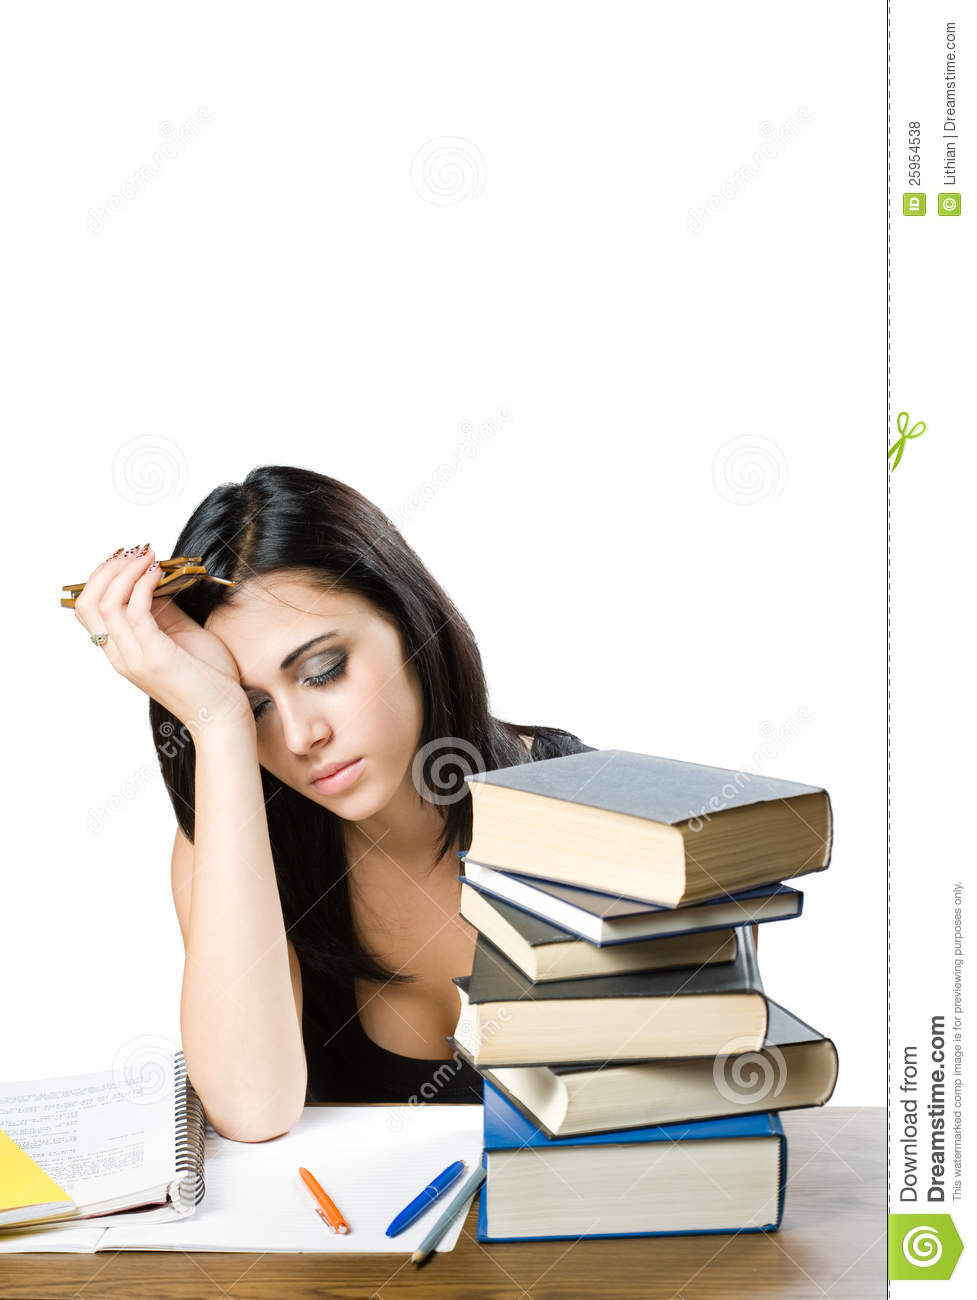 Exhausted Young Student Woman  Royalty Free Stock Photos   Image    